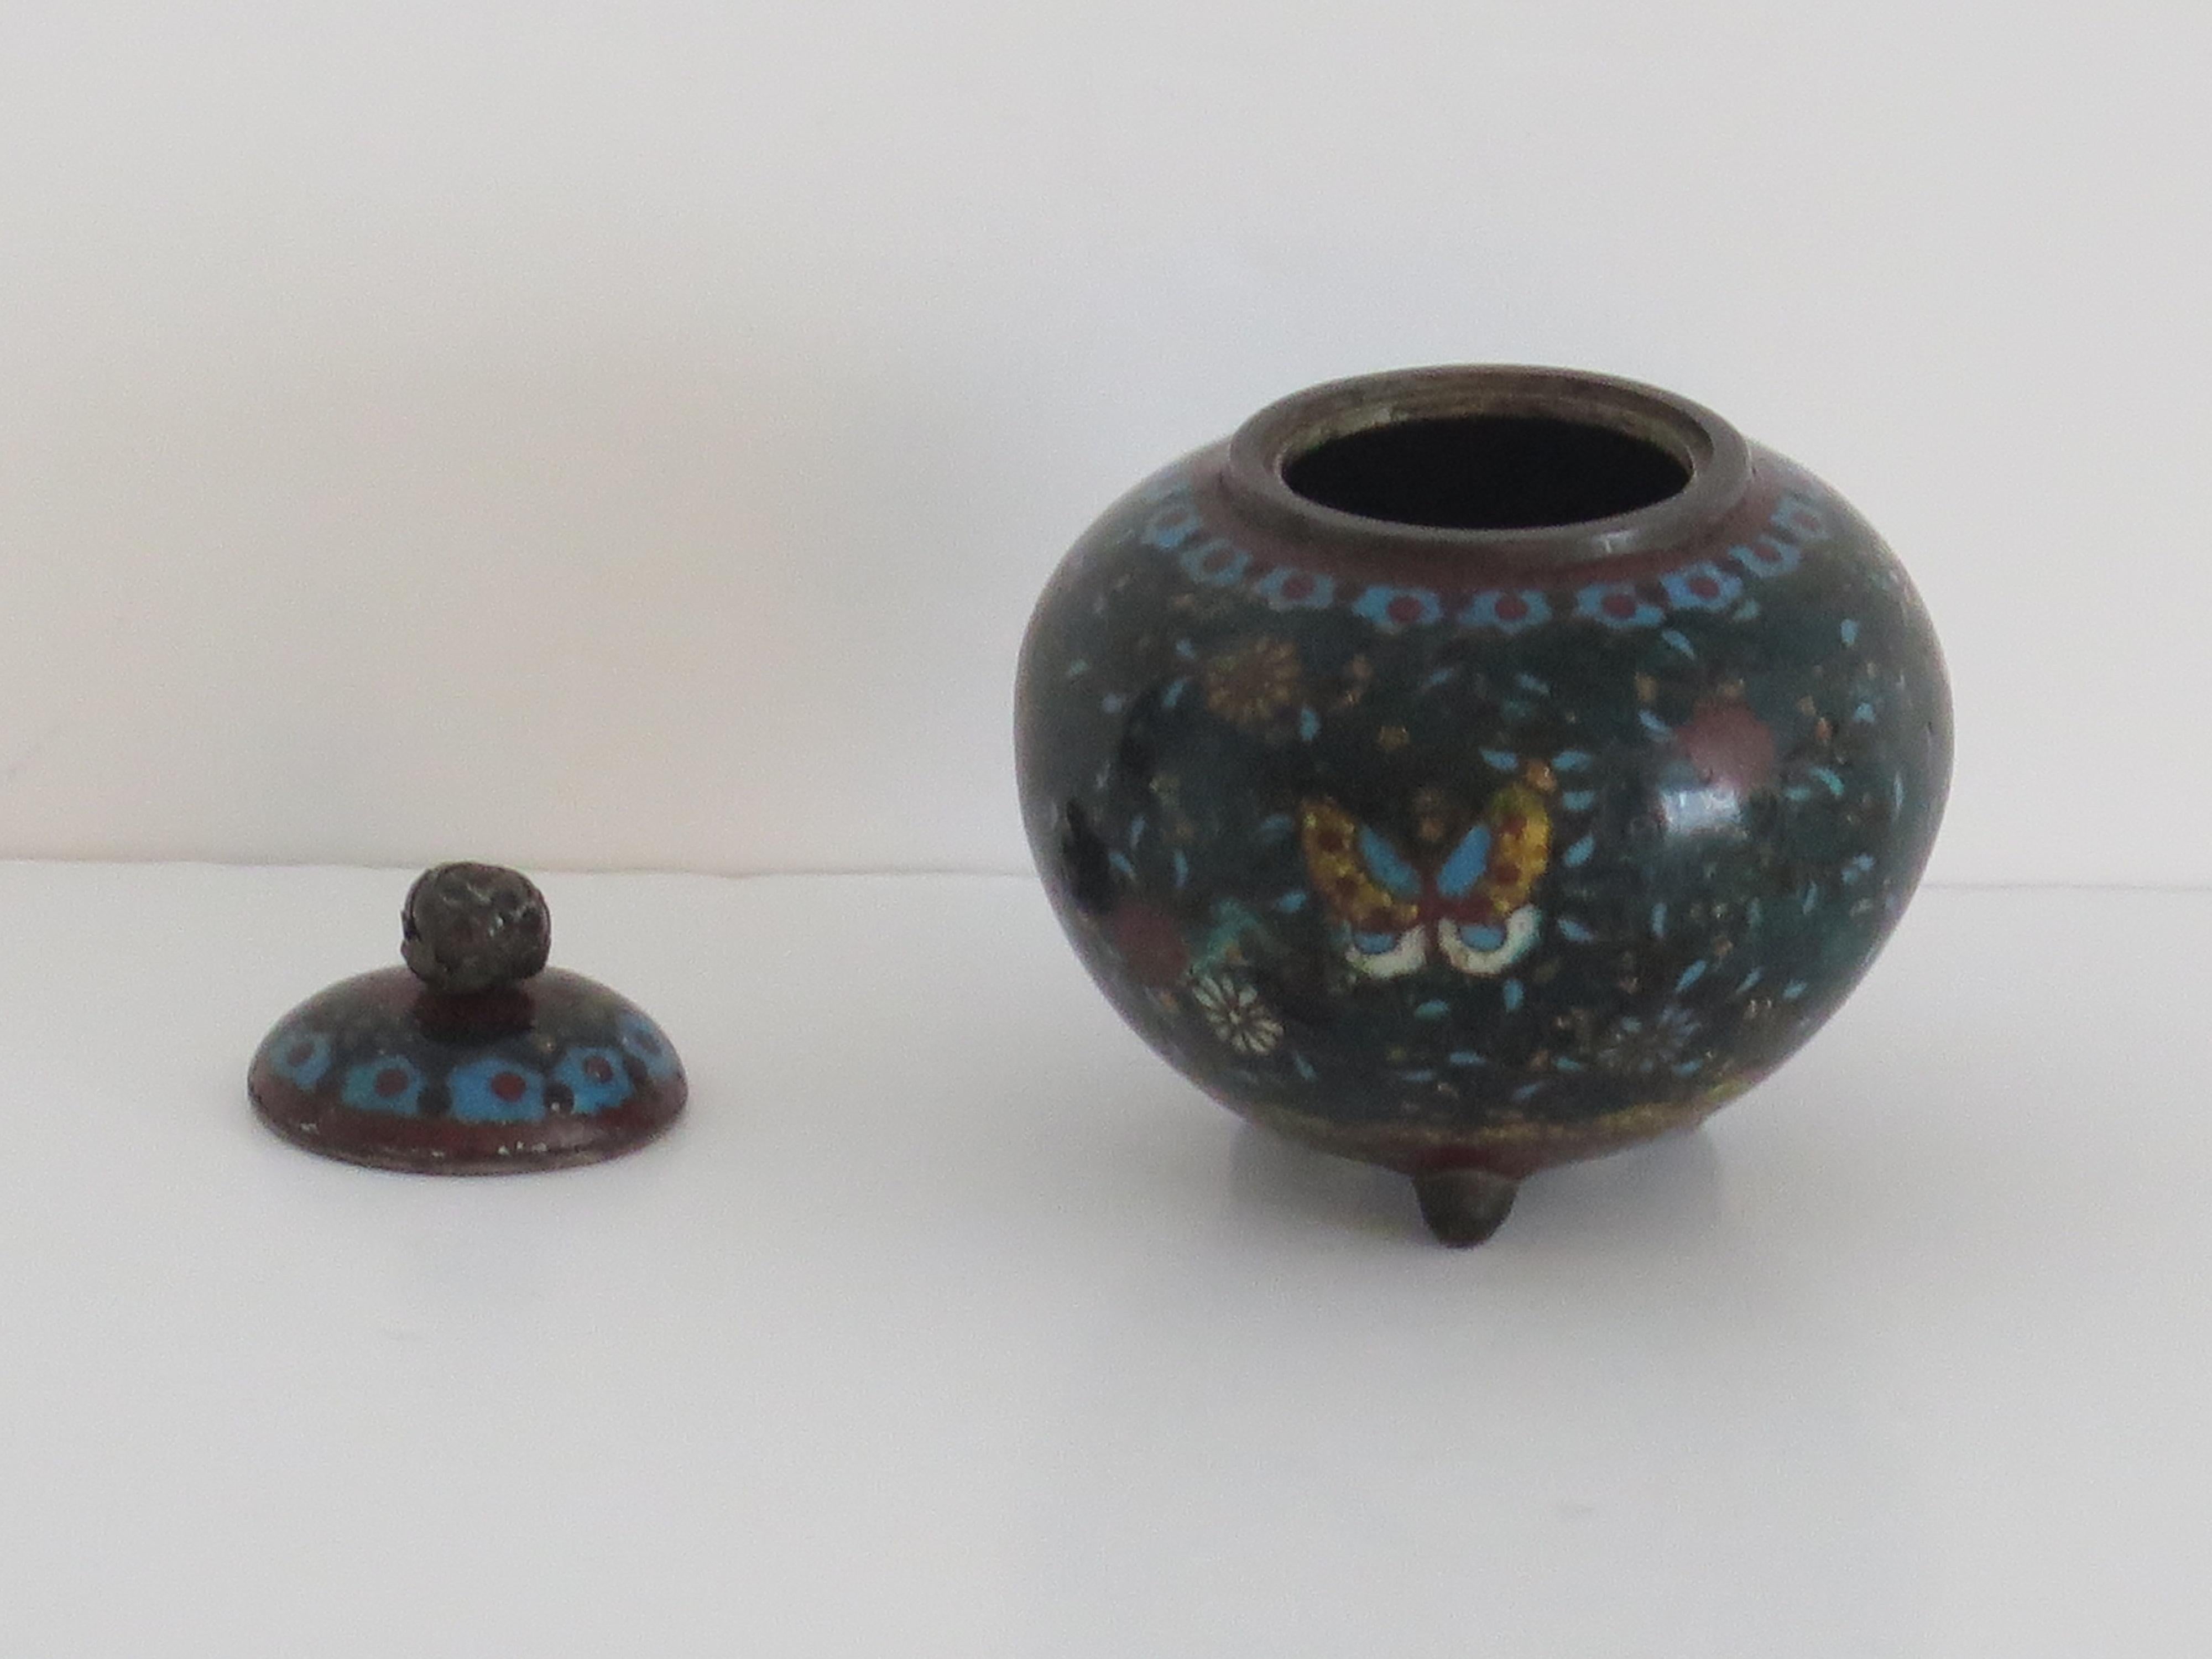 Ceramic 19th Century Japanese Cloisonné Small Lidded Jar, Early Meiji Period  For Sale